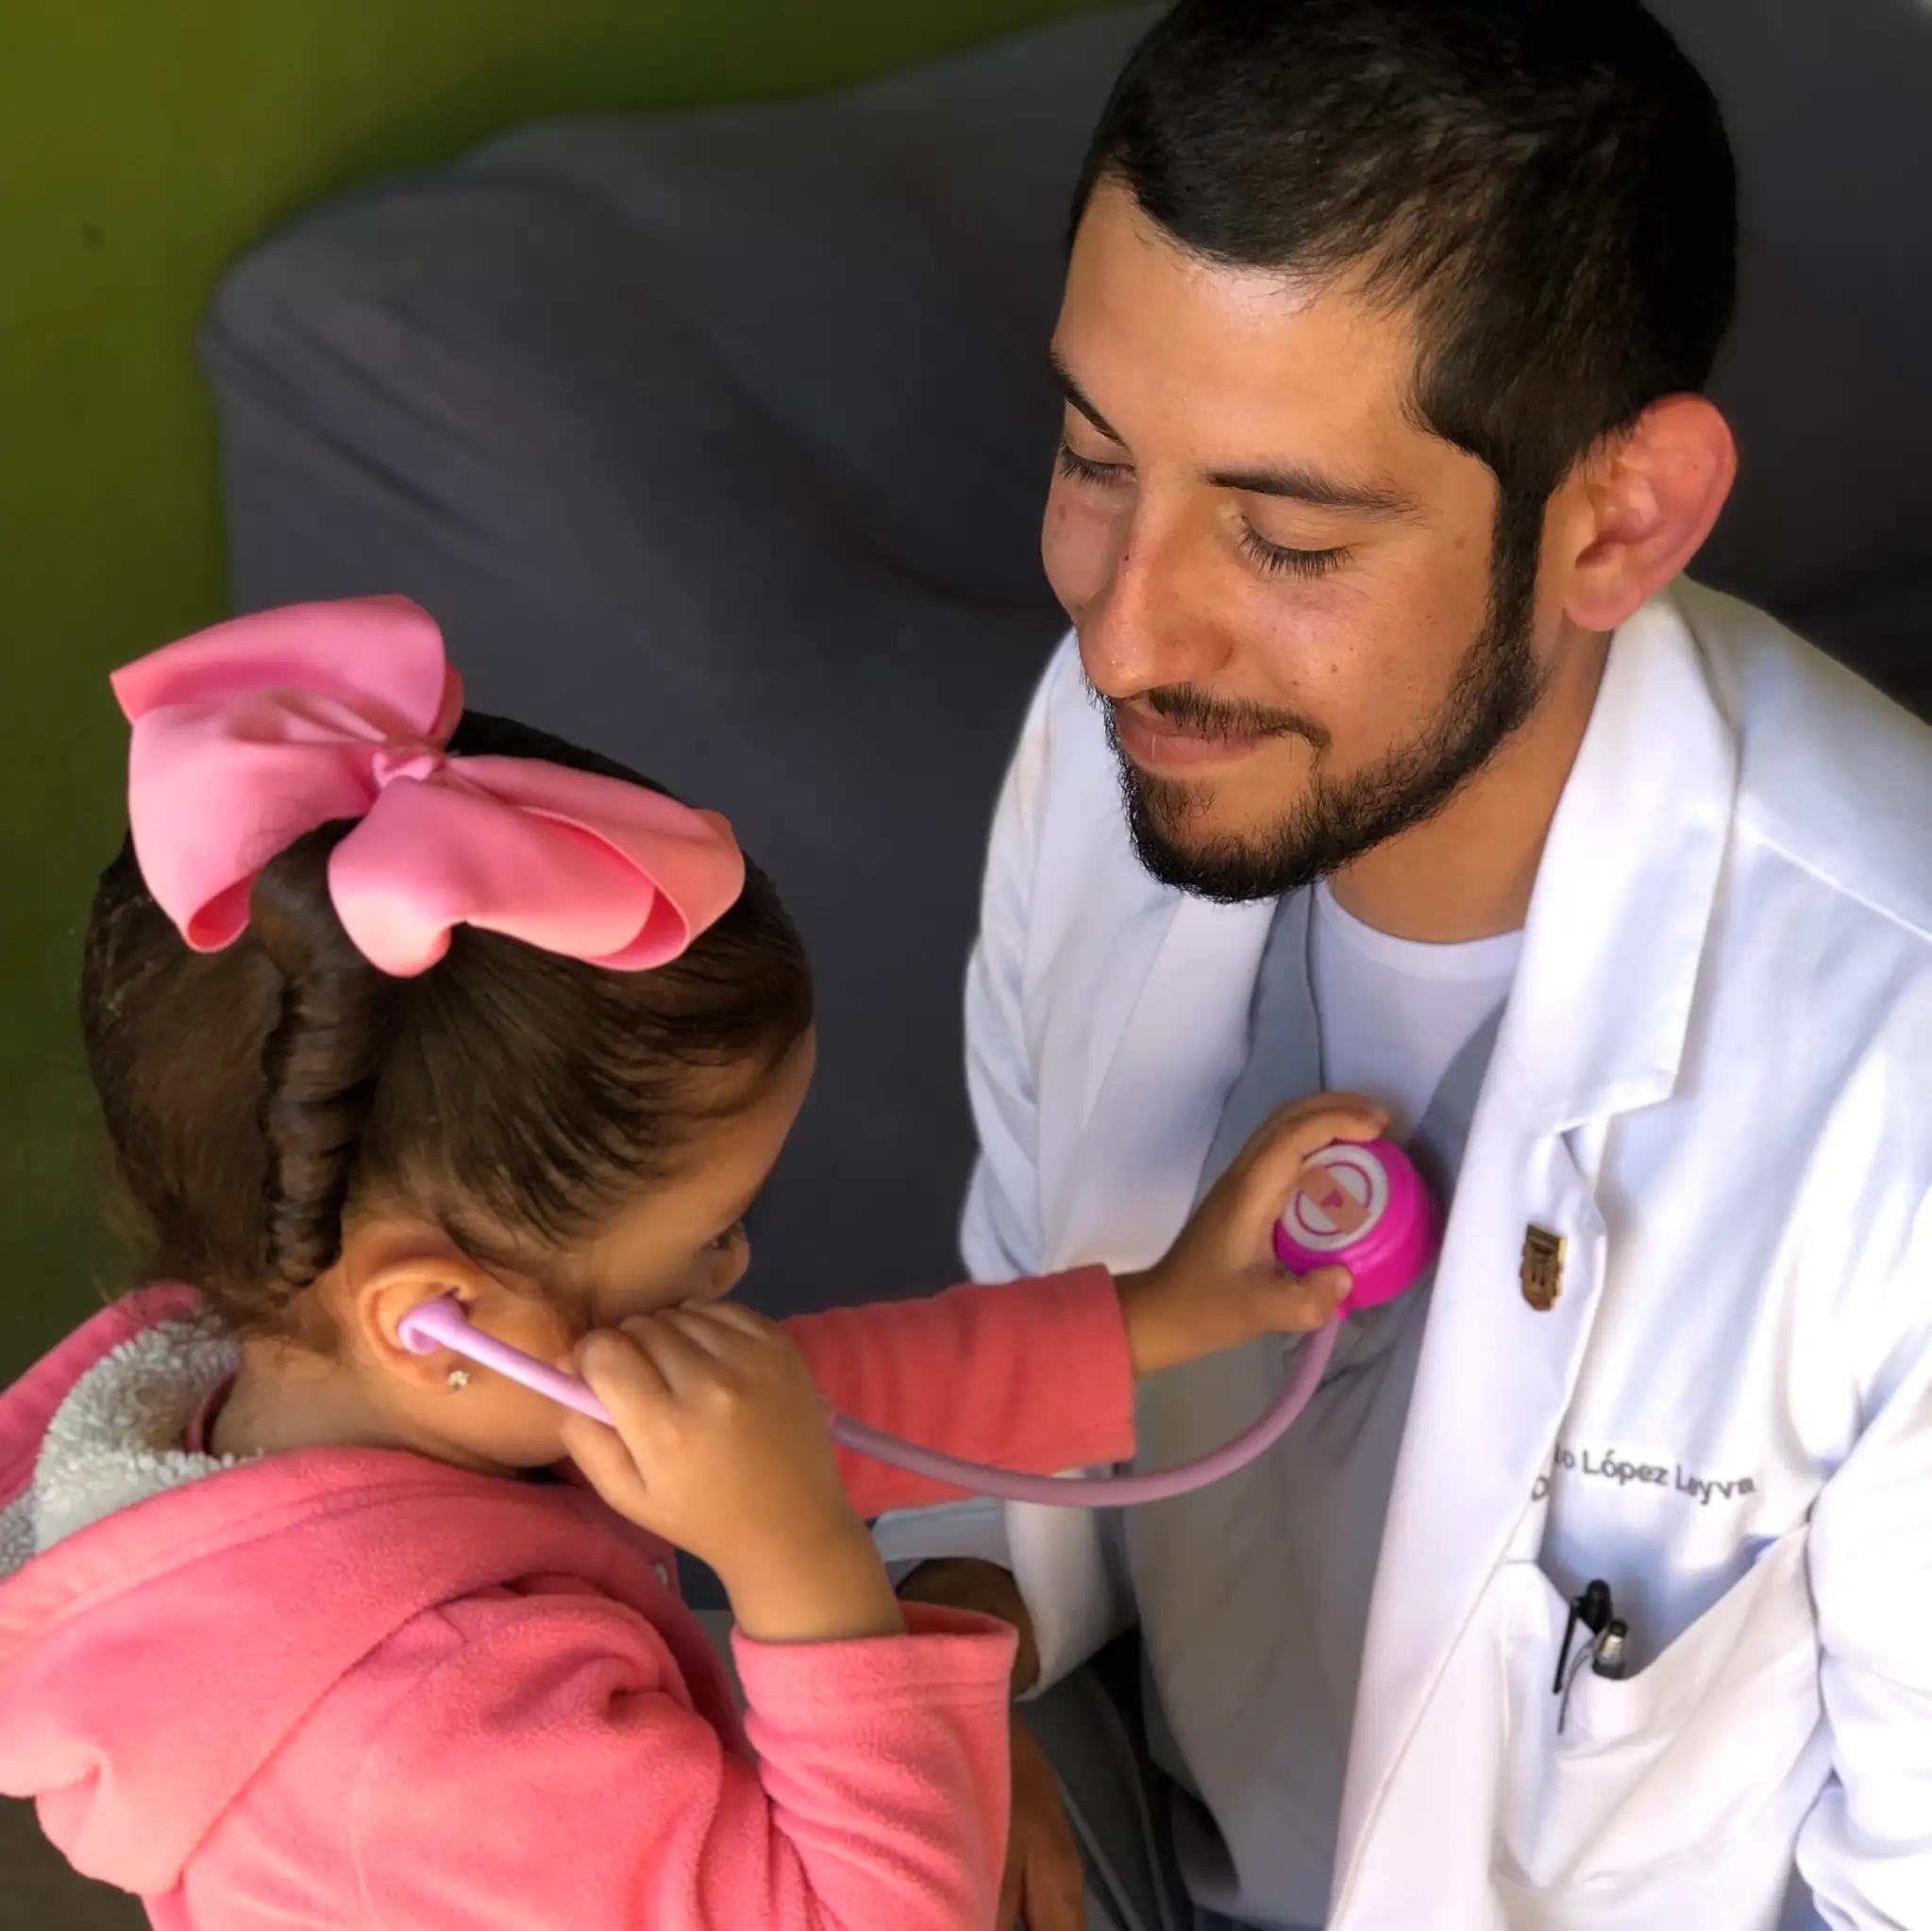 Pediatrician letting a girl test him with stethoscope toy